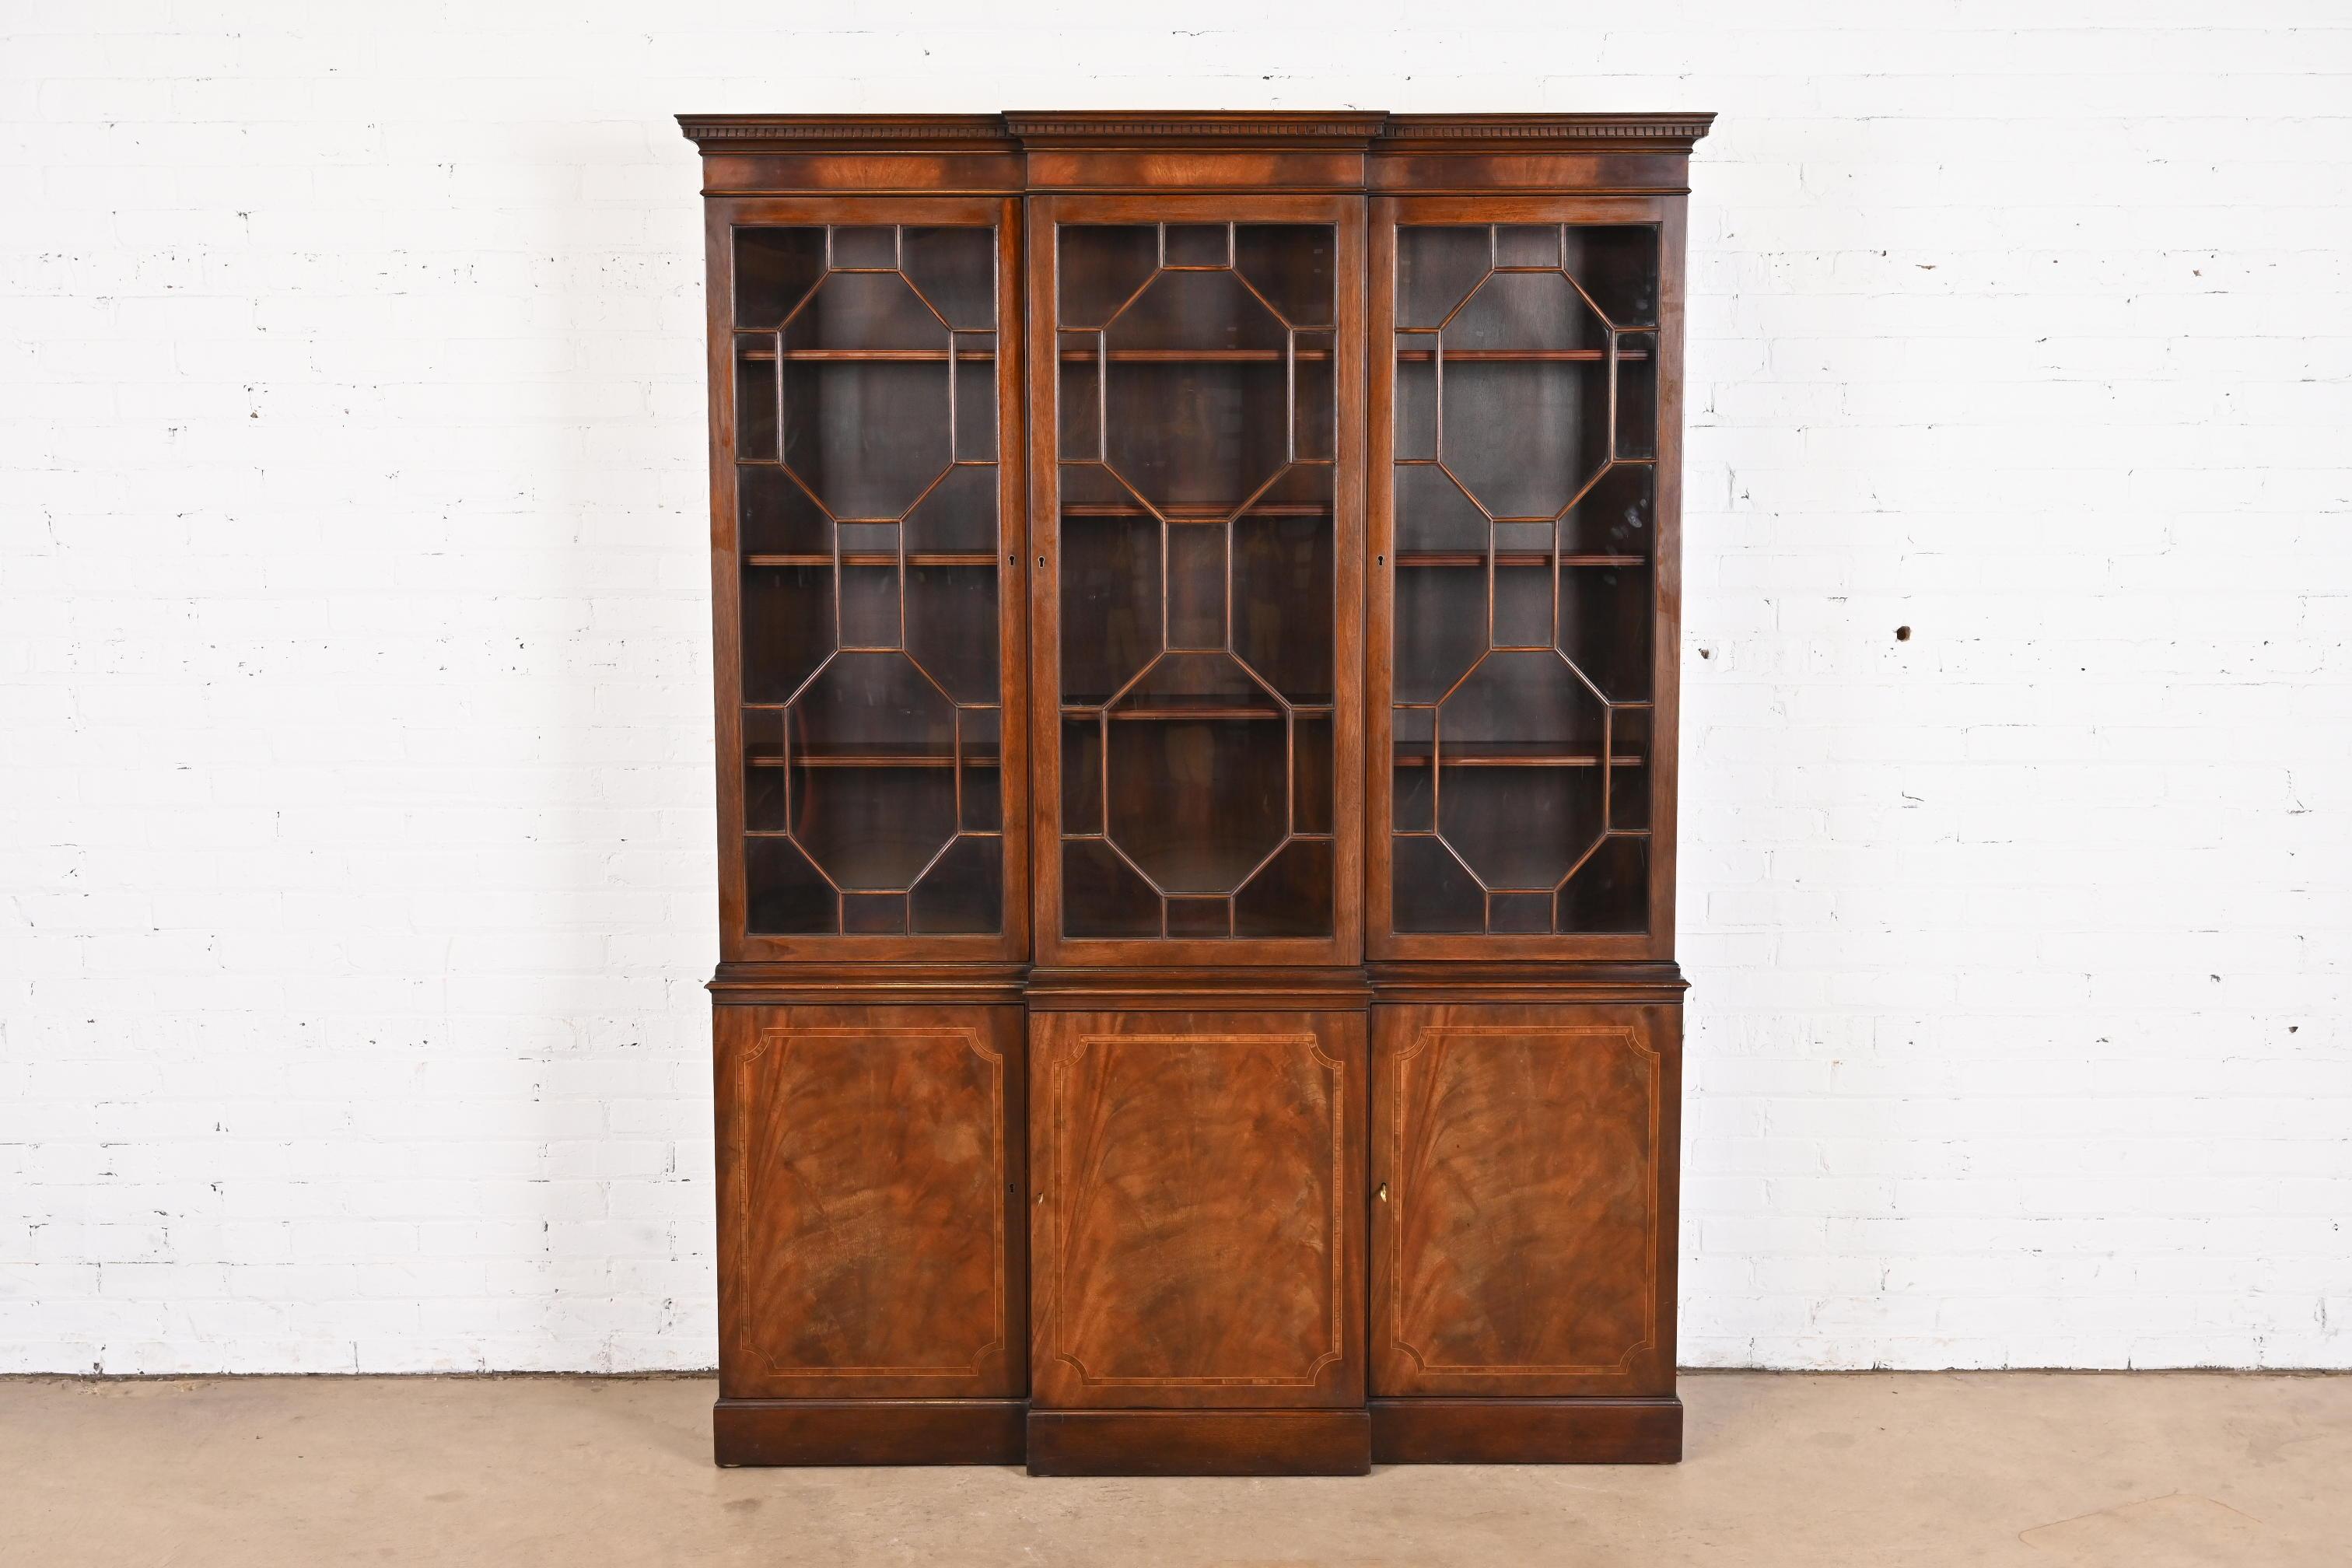 A gorgeous Georgian or Chippendale style breakfront bookcase or dining cabinet

By Baker Furniture

USA, Circa 1960s

Book-matched flame mahogany, with satinwood inlay, mullioned glass front doors, and original brass hardware. Cabinets lock, and